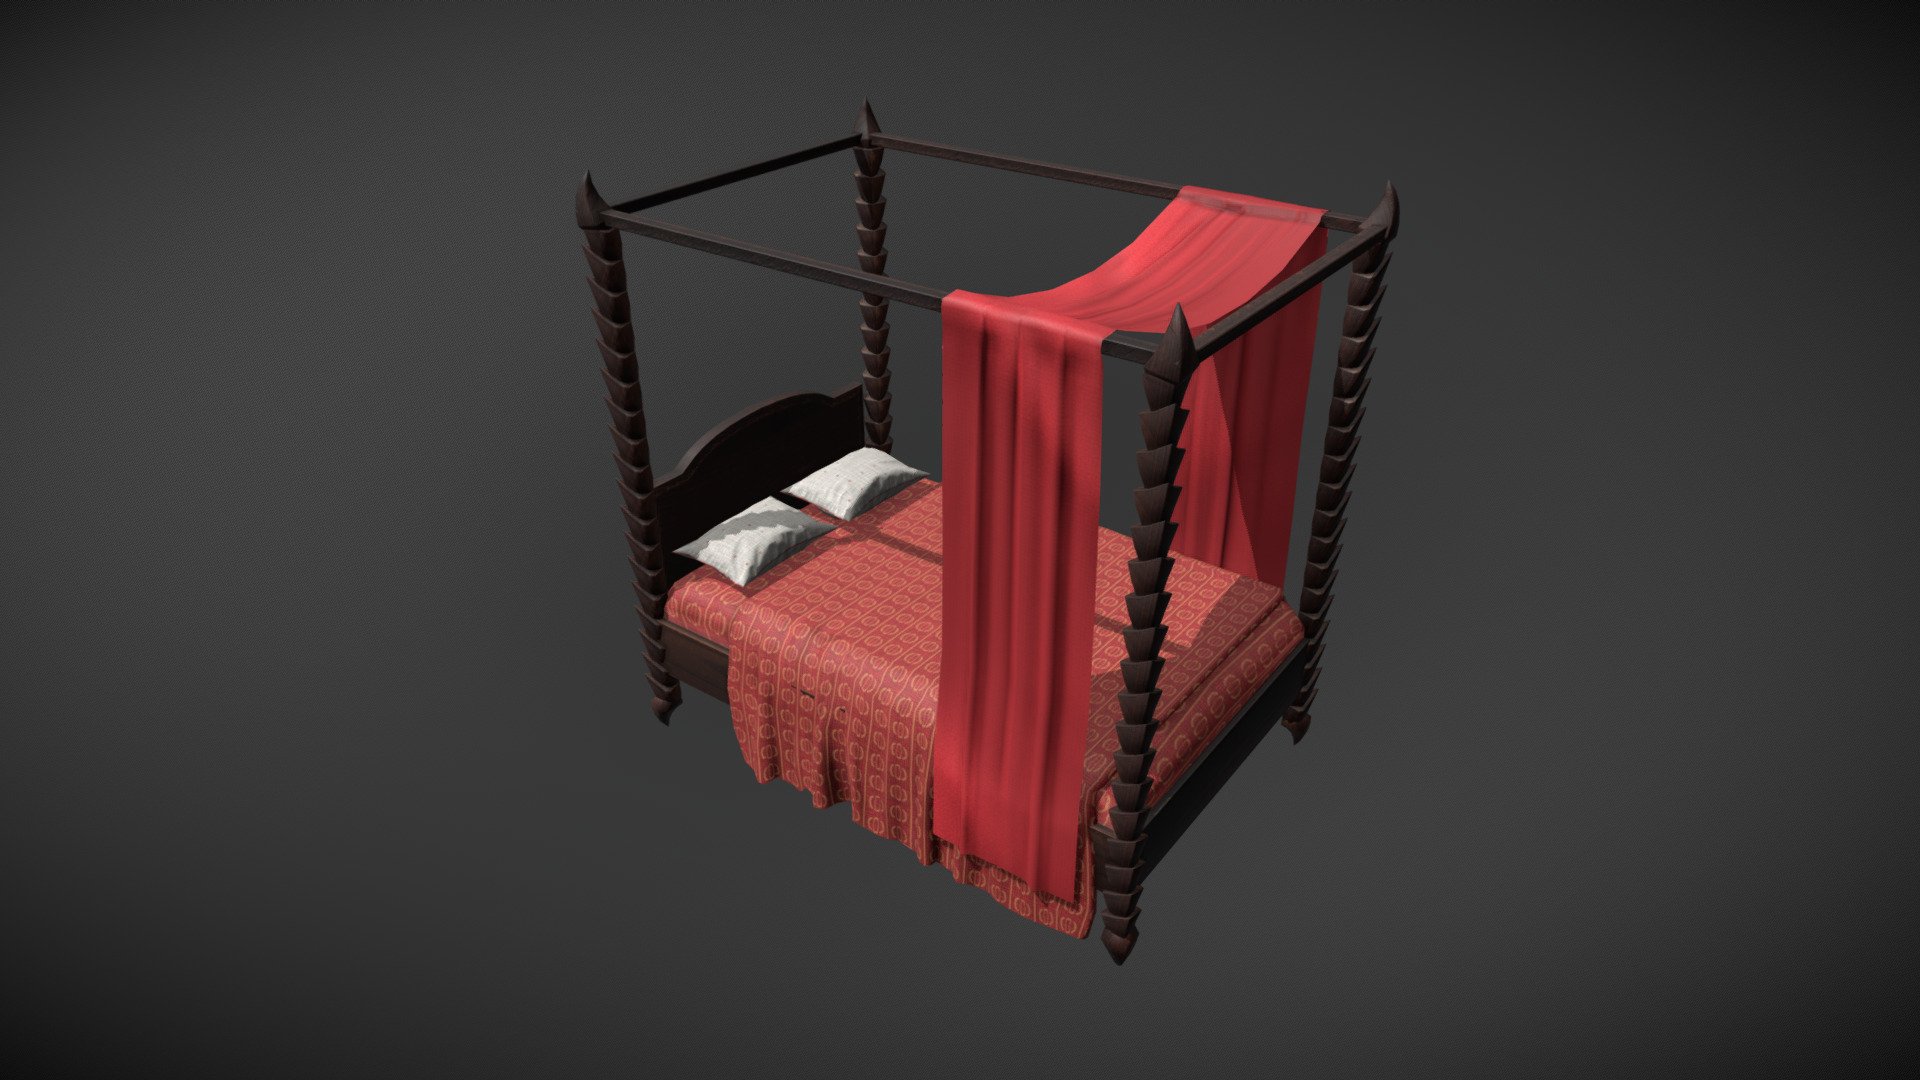 A canopy bed for the upcoming model pack. The bedposts and curtains are separate meshes, so the bed can be used without them too. Curtain is ready for cloth simulation in Unity 3d model